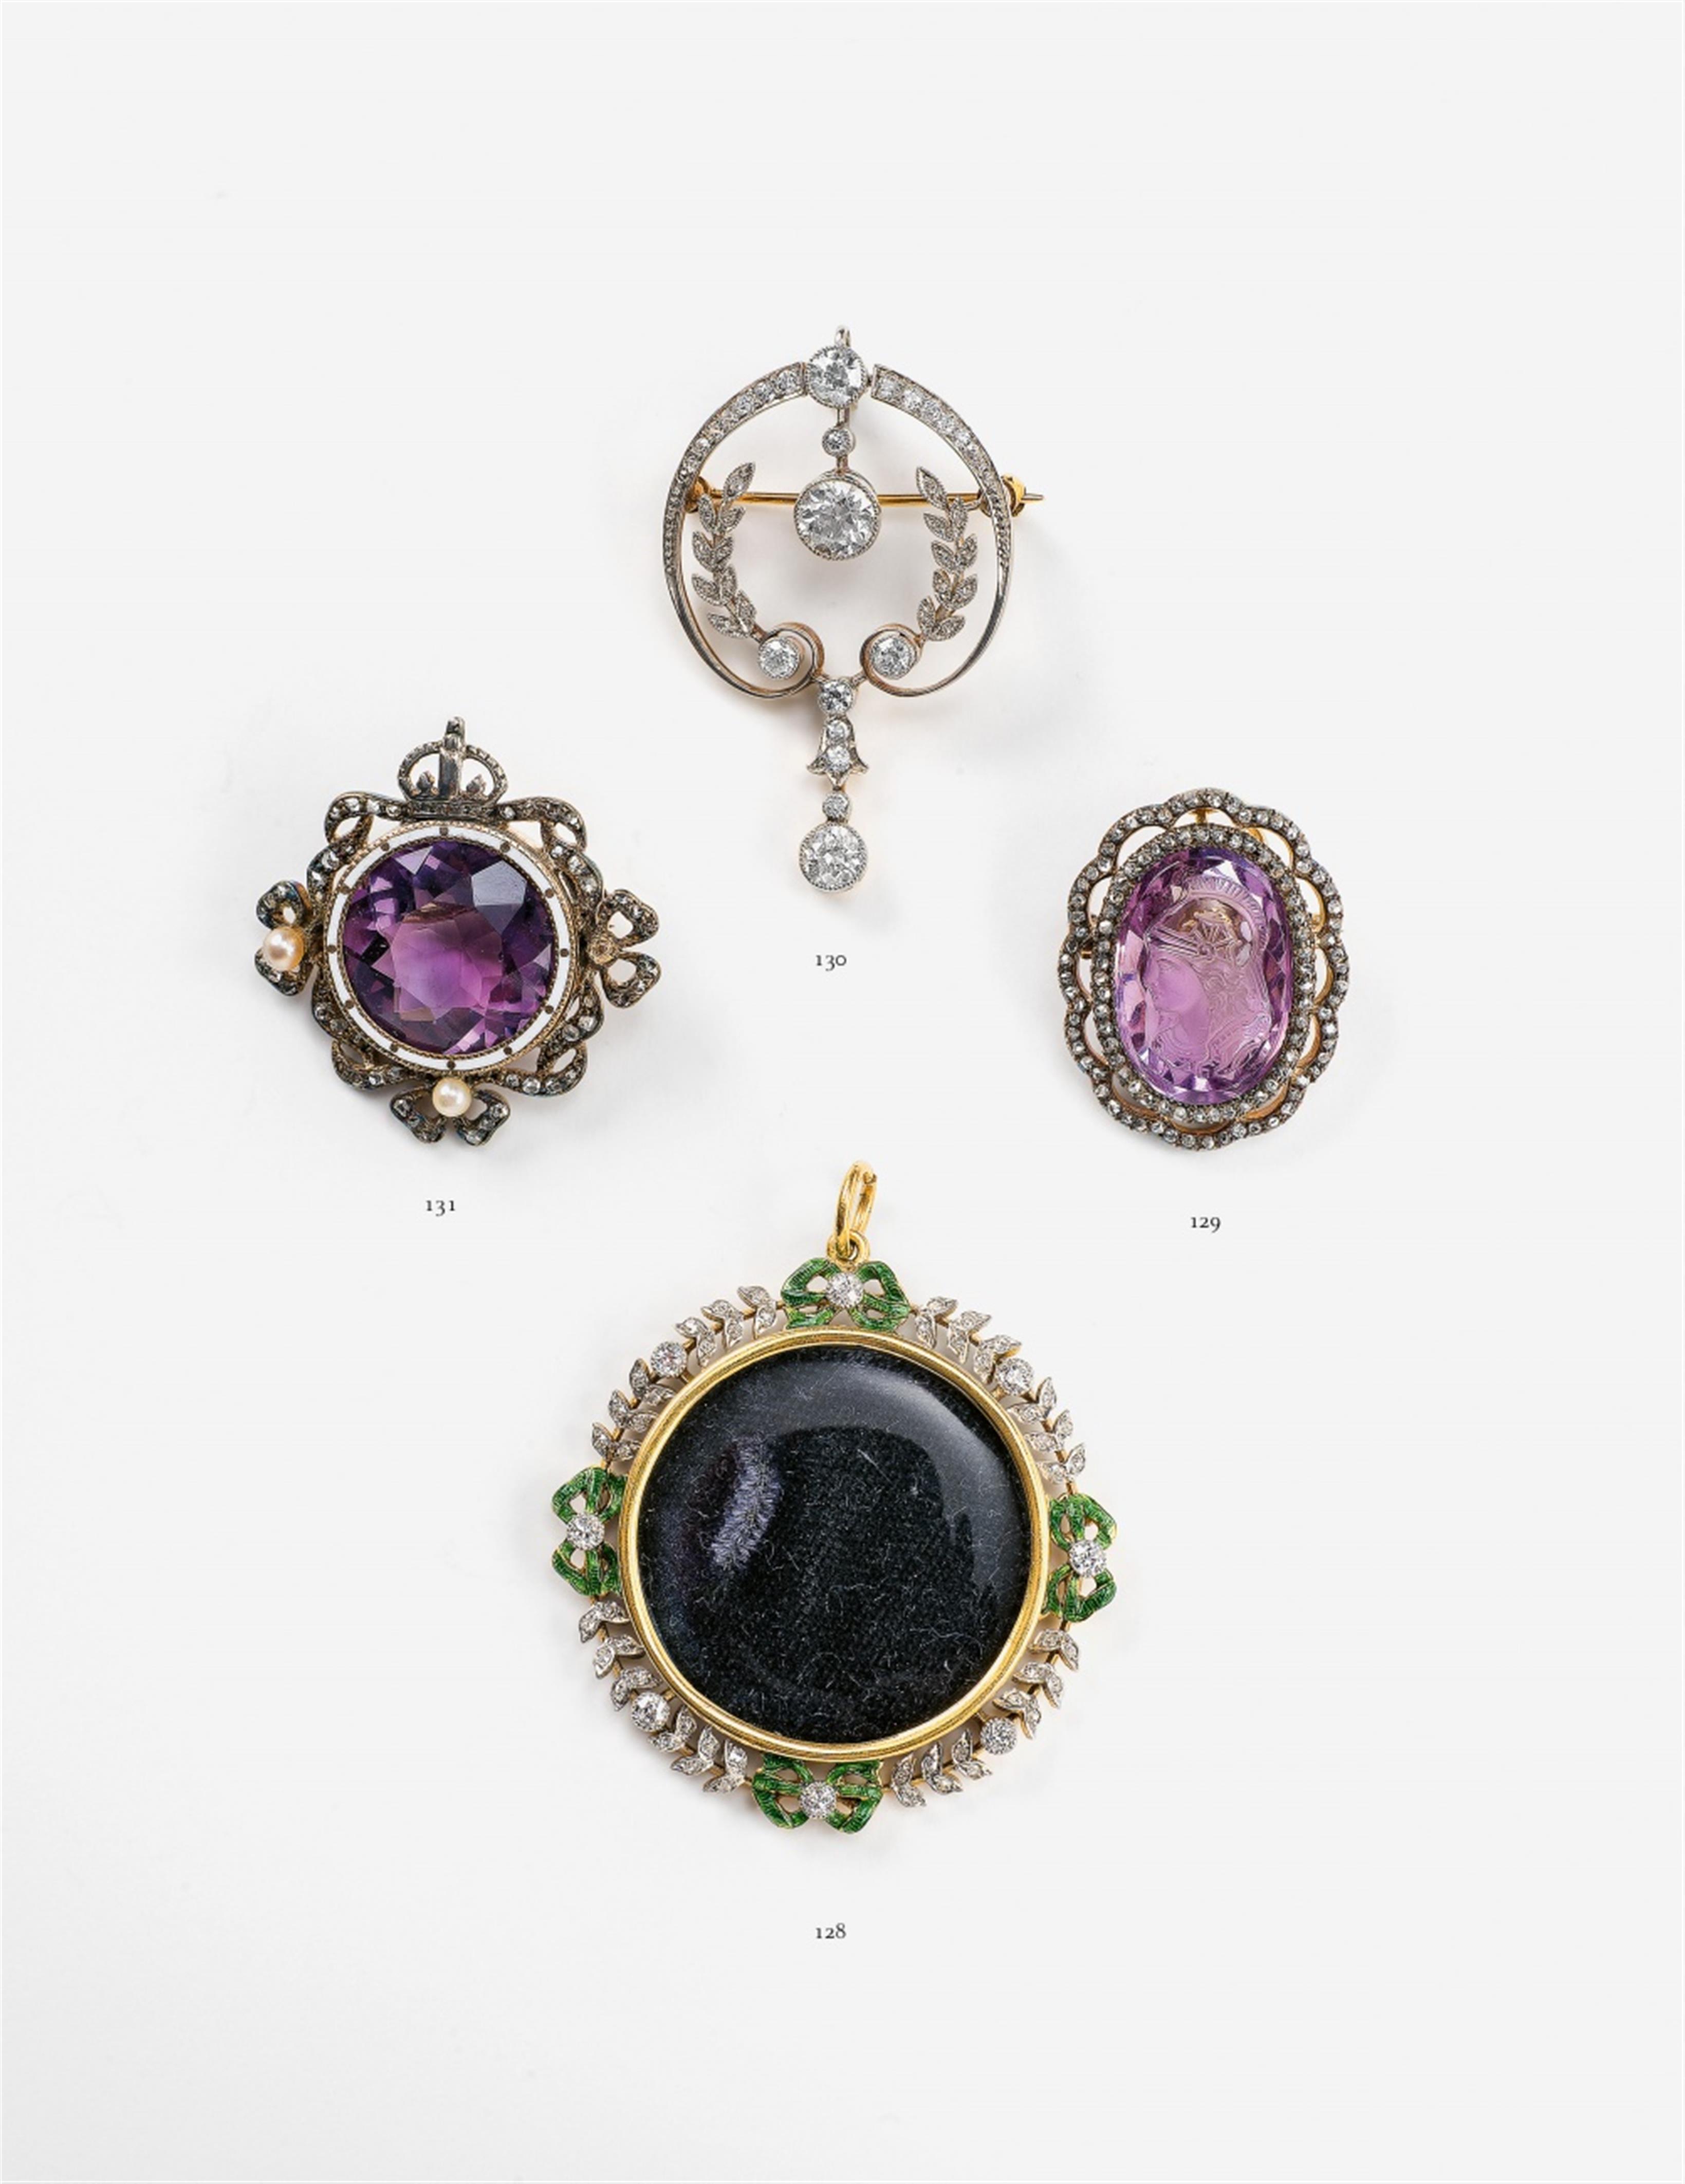 A princely 9k gold, enamel and amethyst brooch - image-2